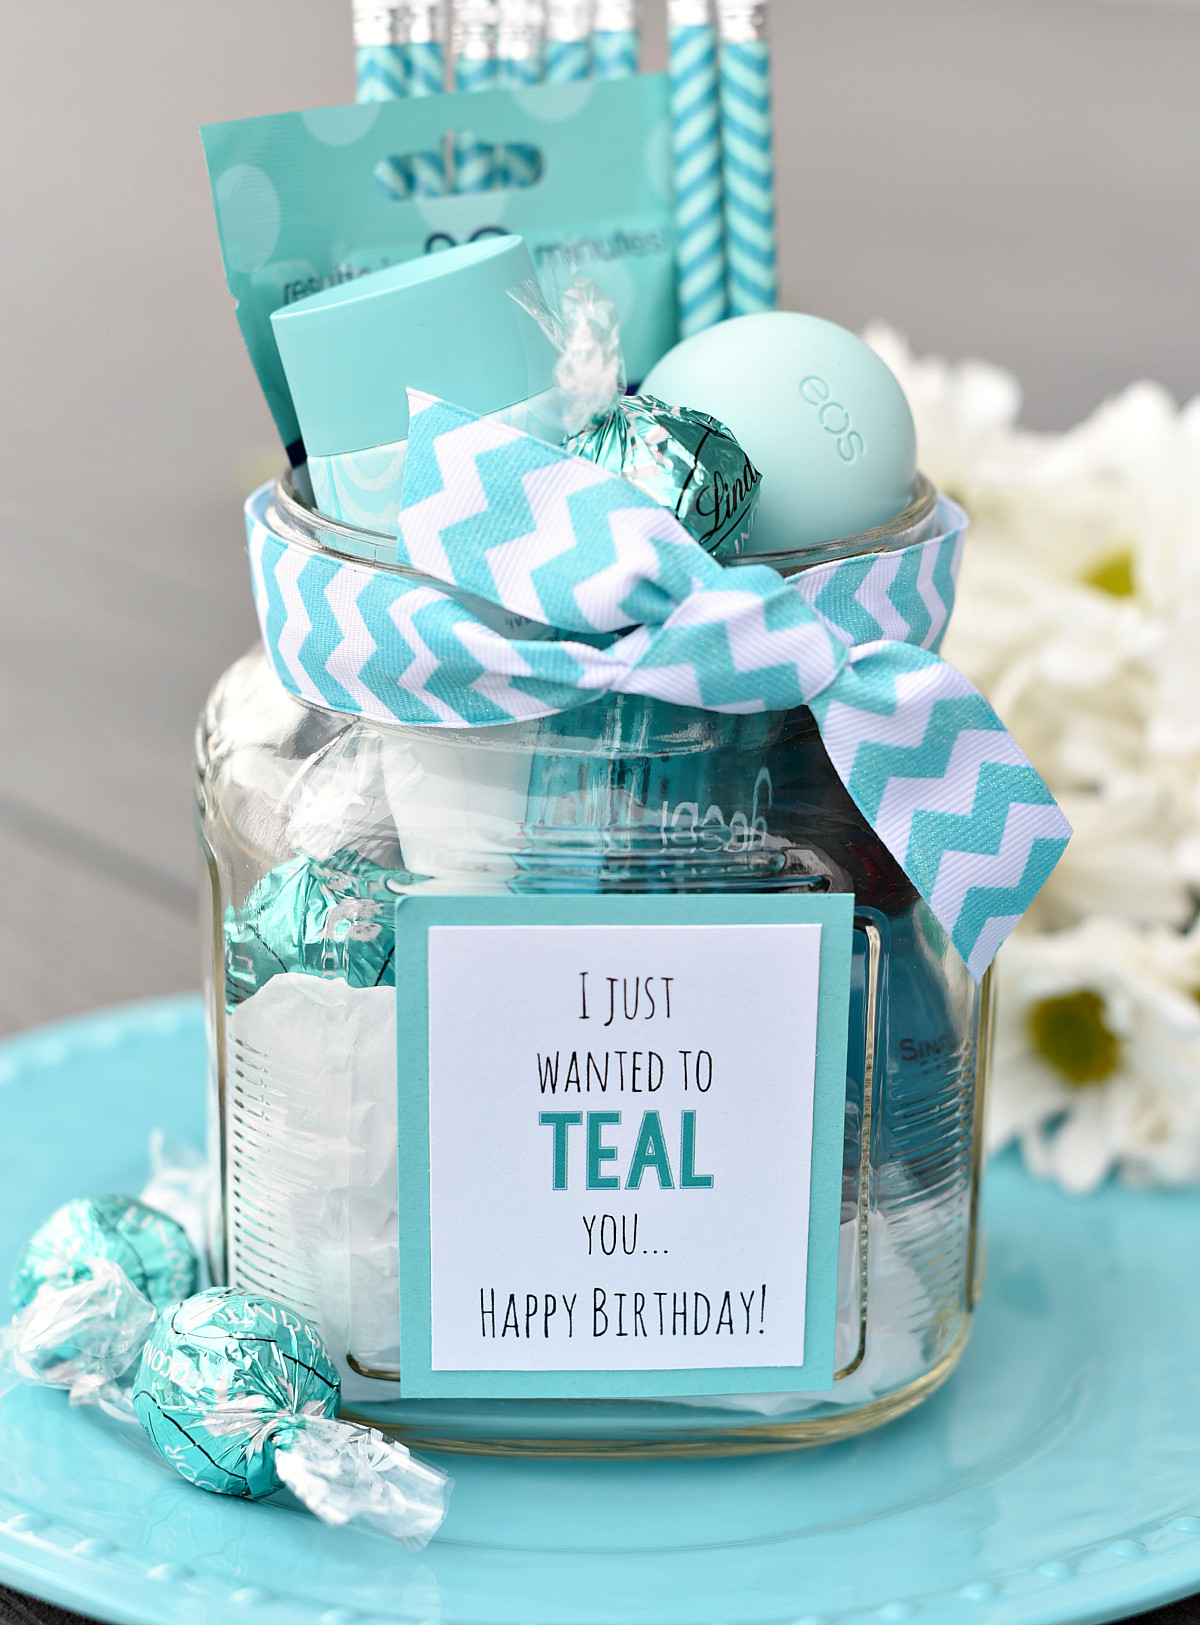 Birthday Party Gift Ideas
 Teal Birthday Gift Idea for Friends – Fun Squared